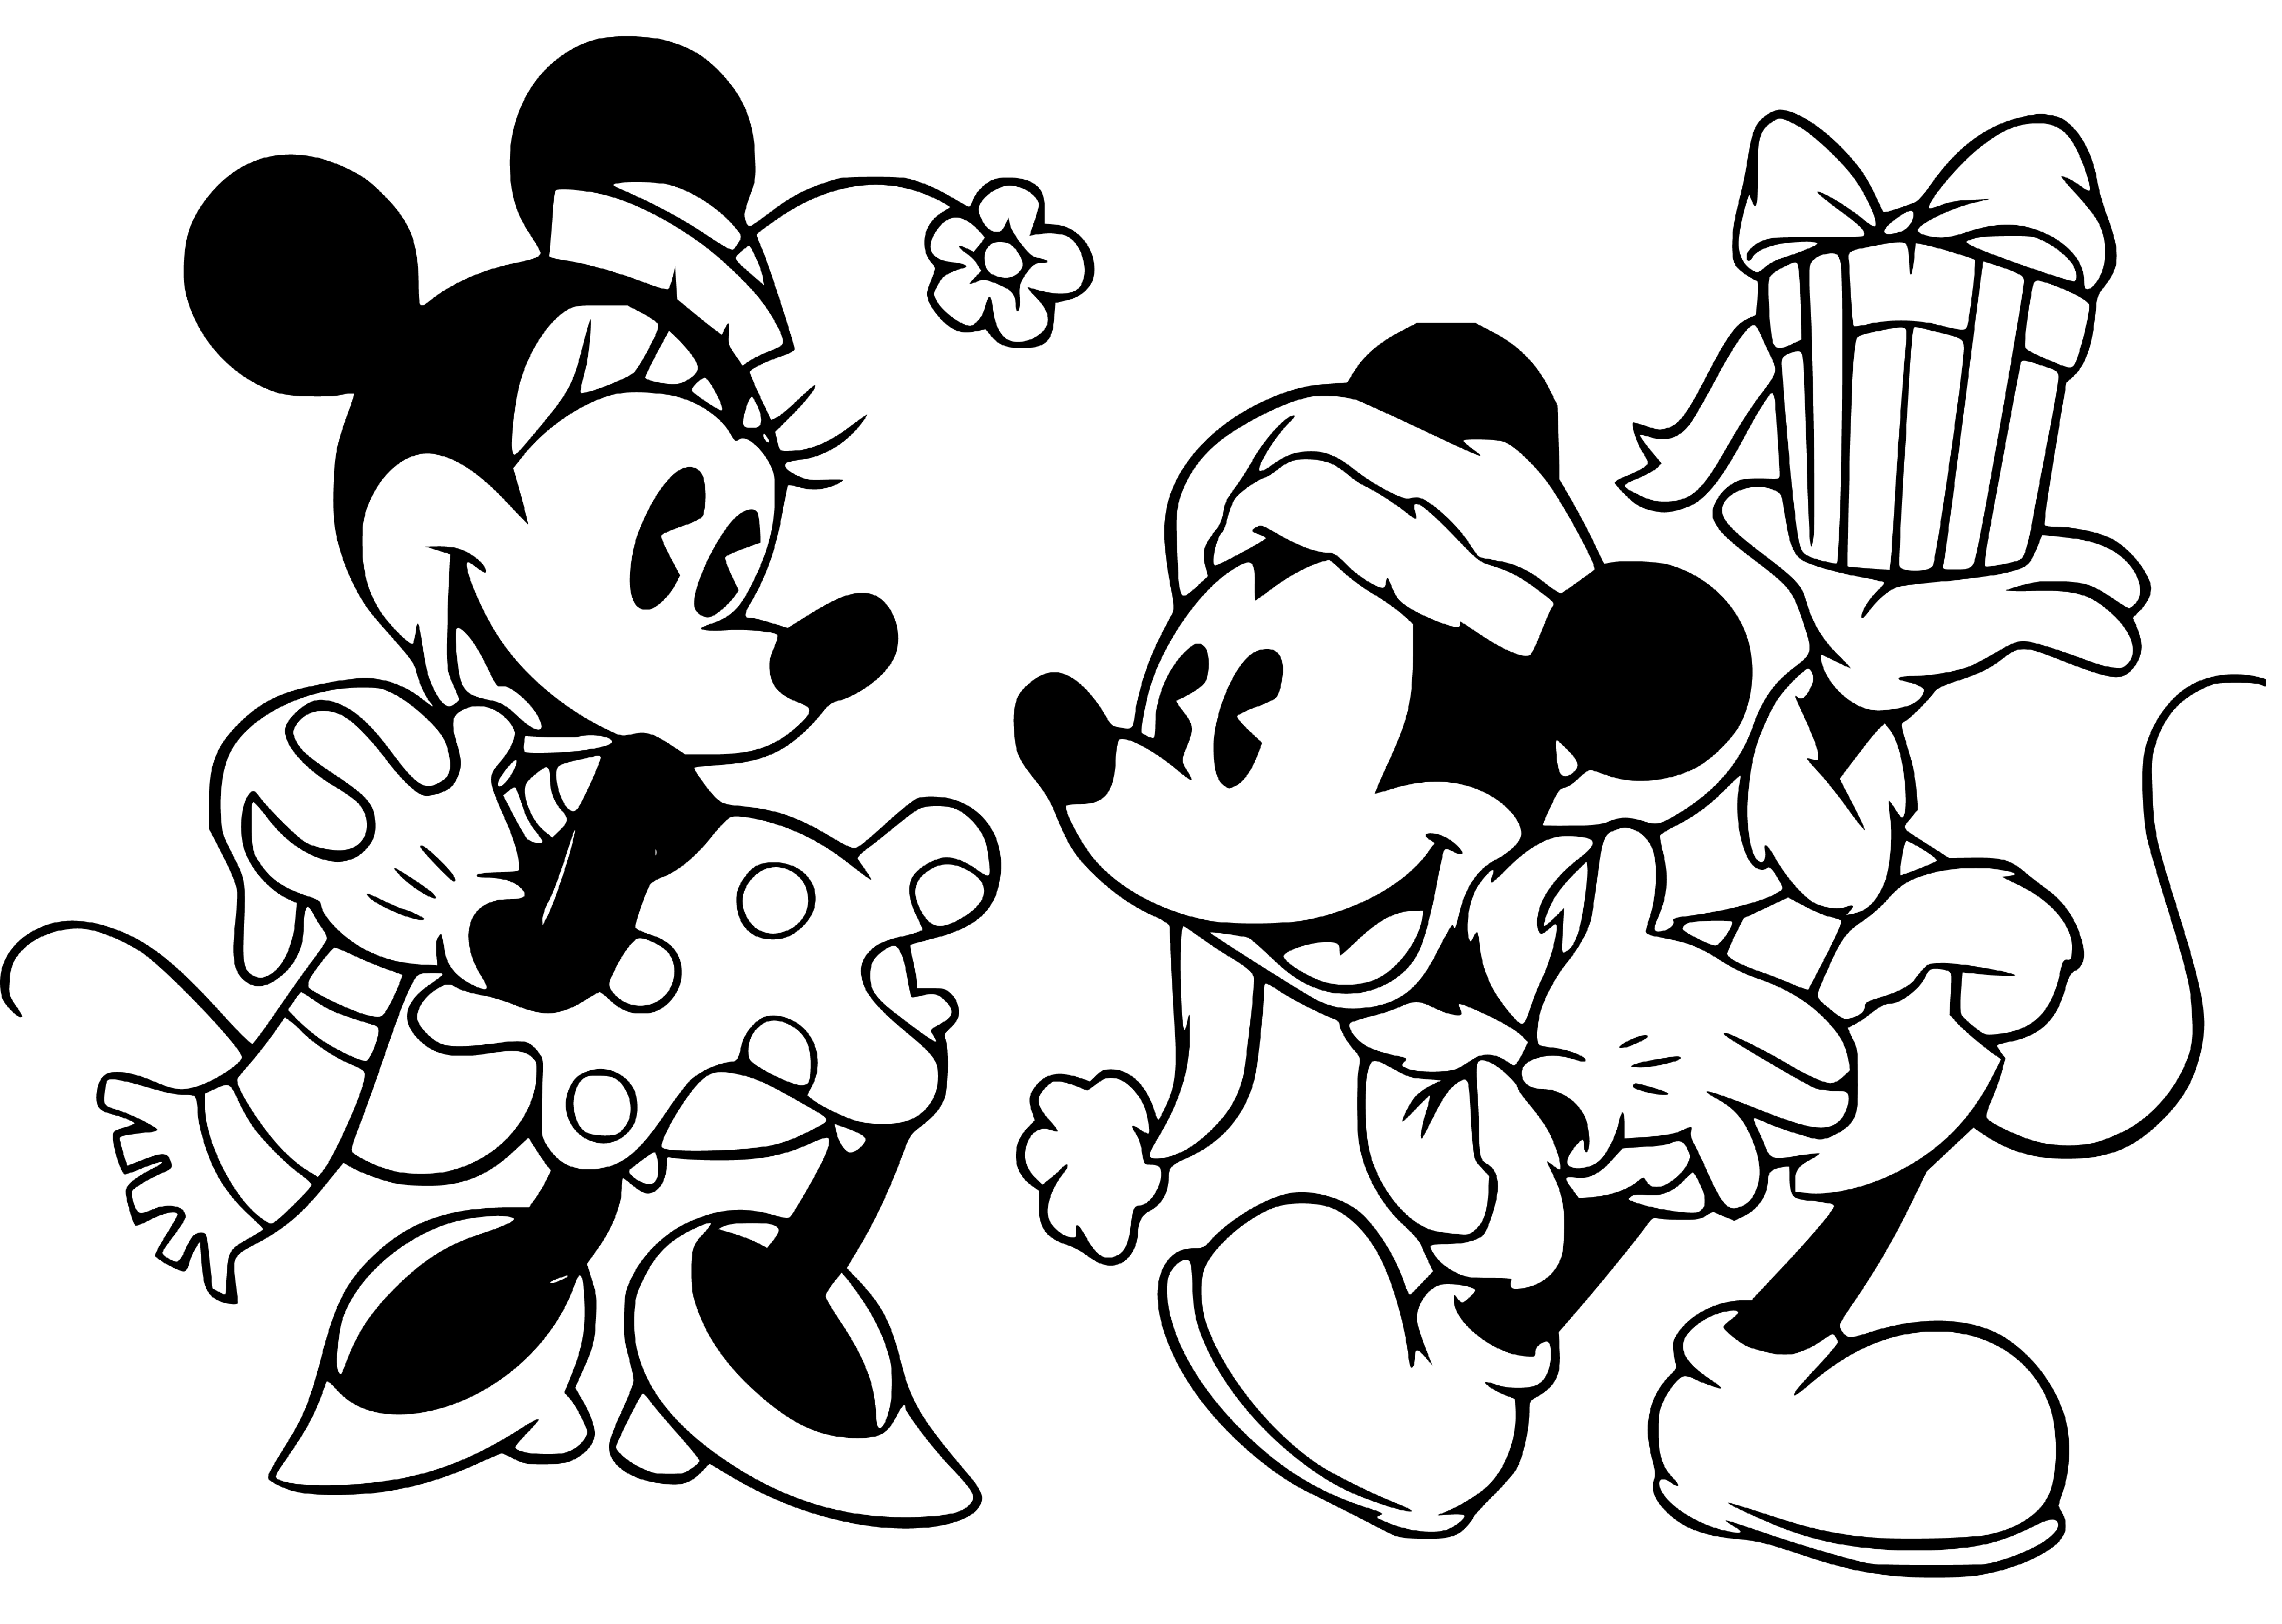 Mickey giving a present to Minnie Mouse painting page - SheetalColor.com